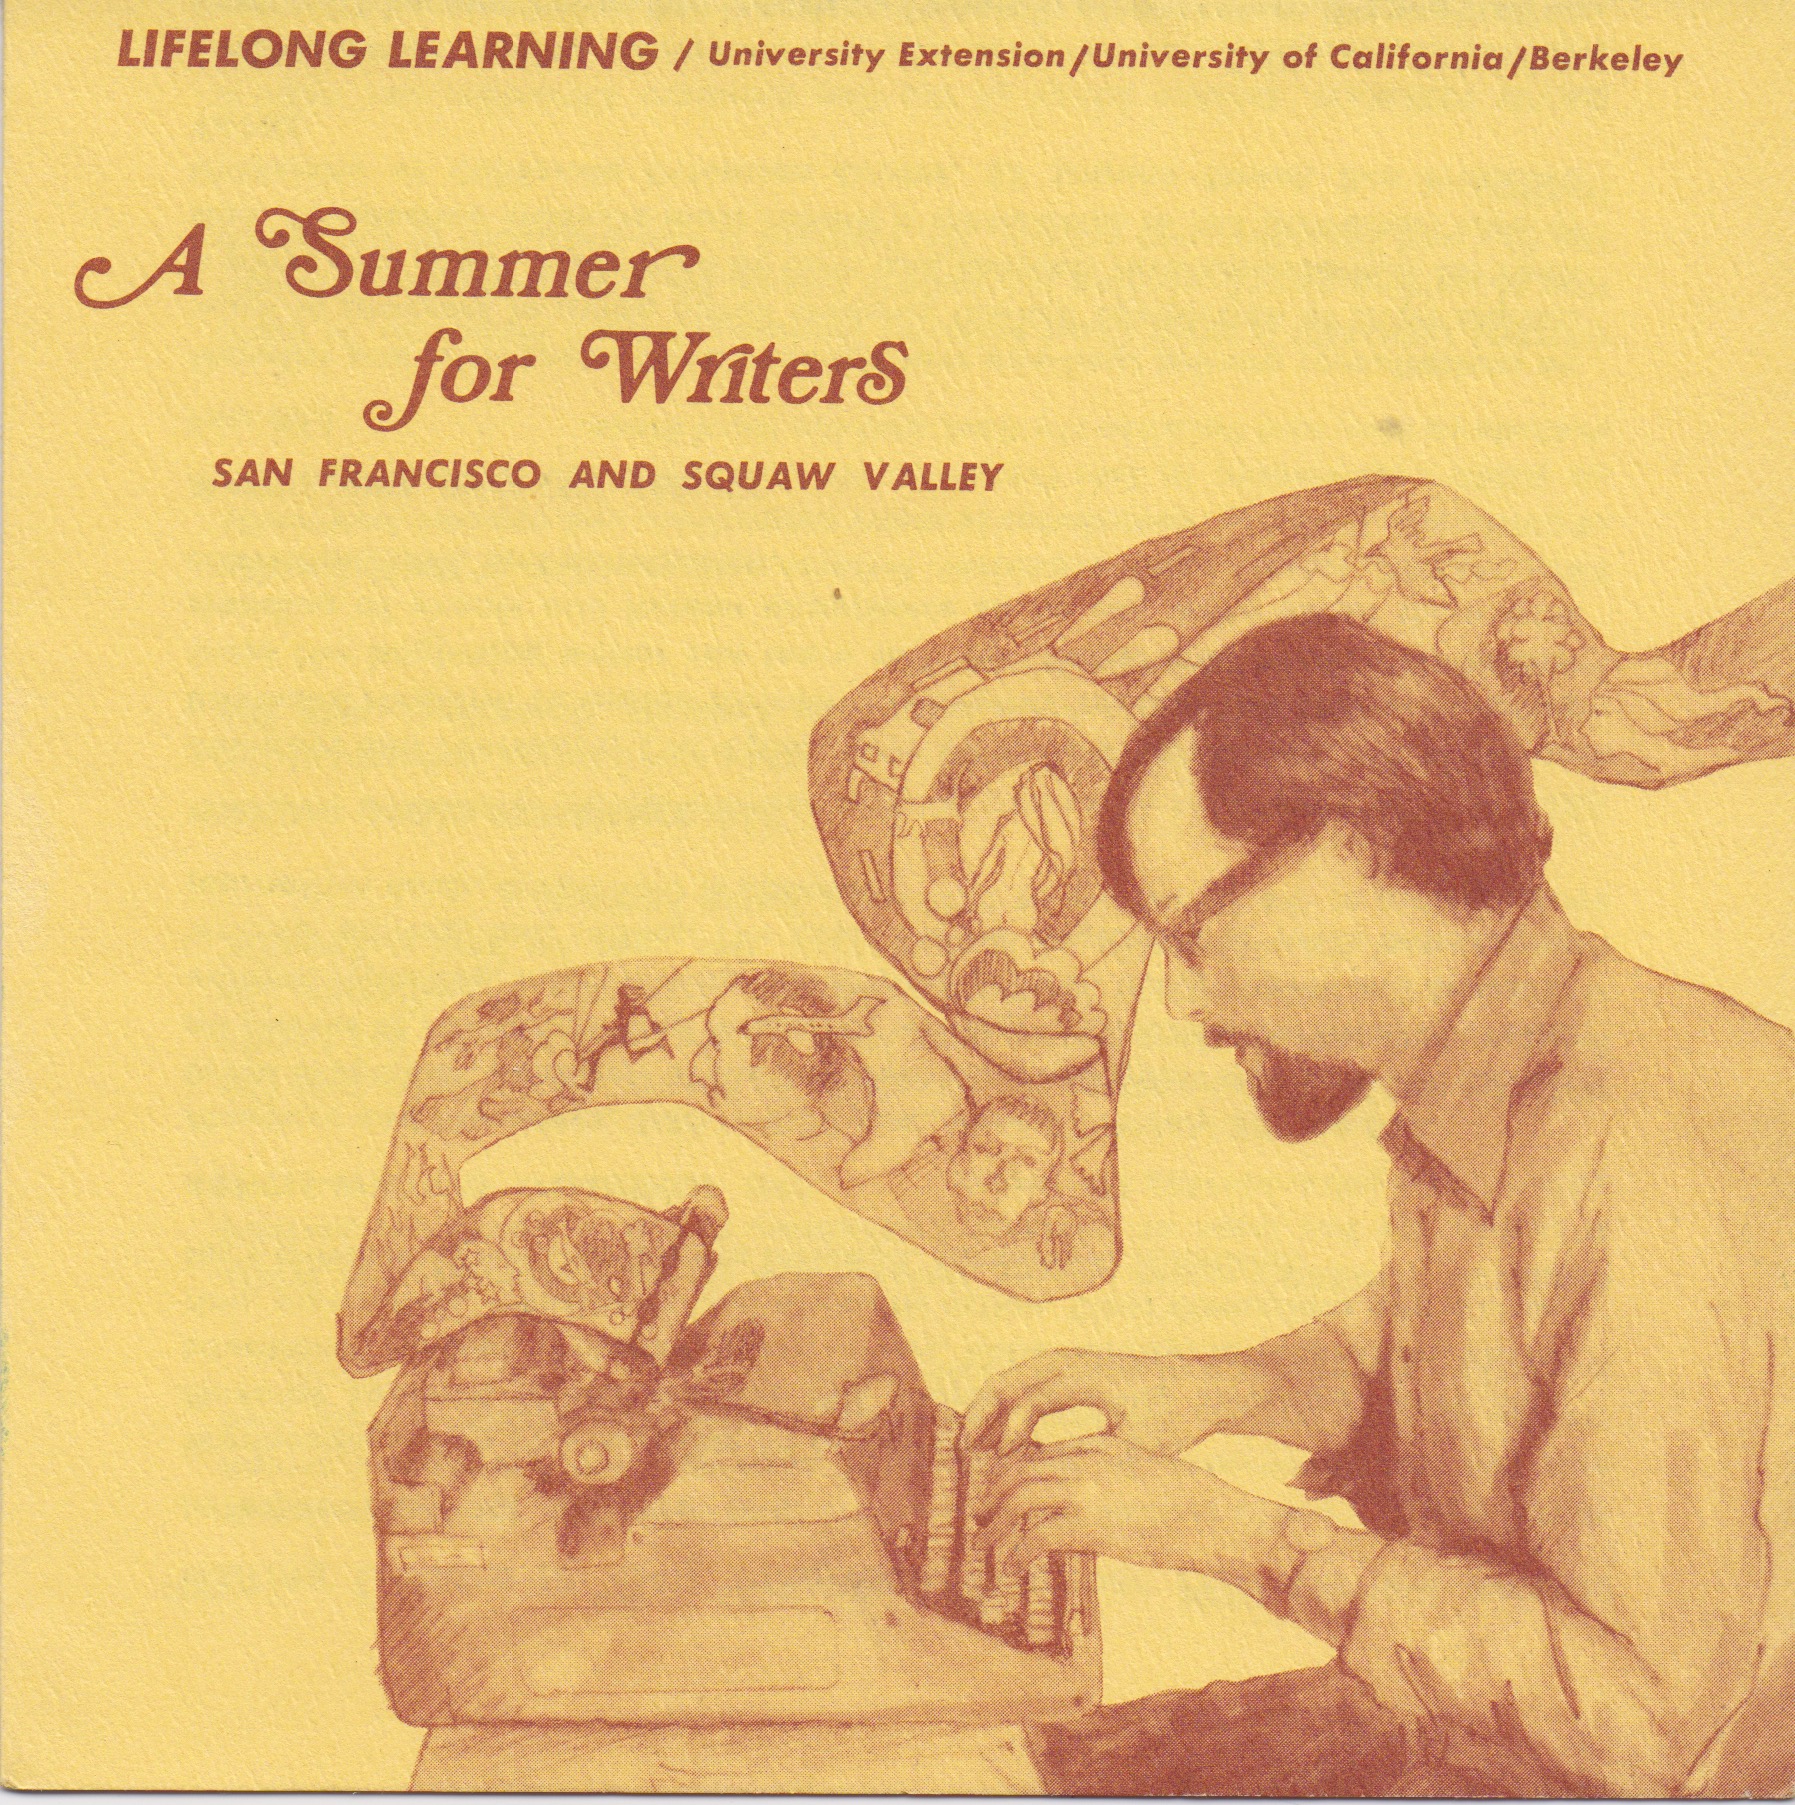 Image of cover of first annual brochure.